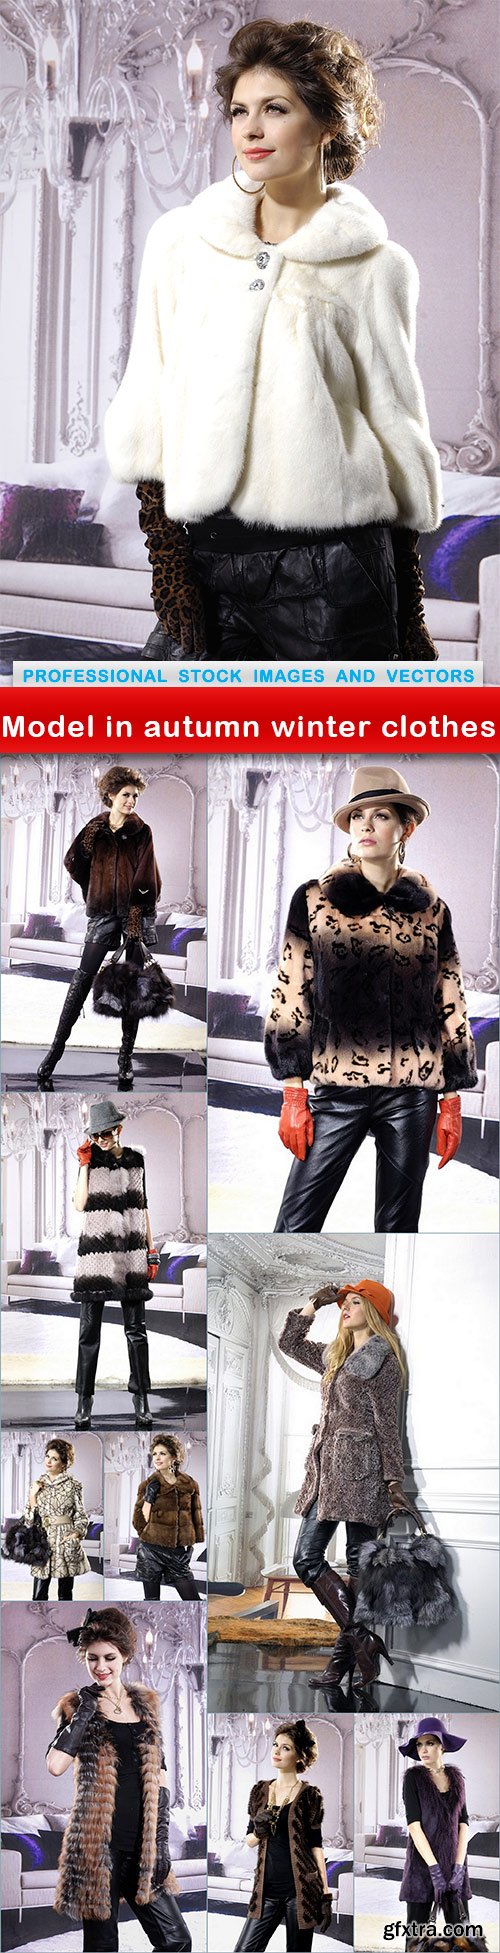 Model in autumn winter clothes - 10 UHQ JPEG